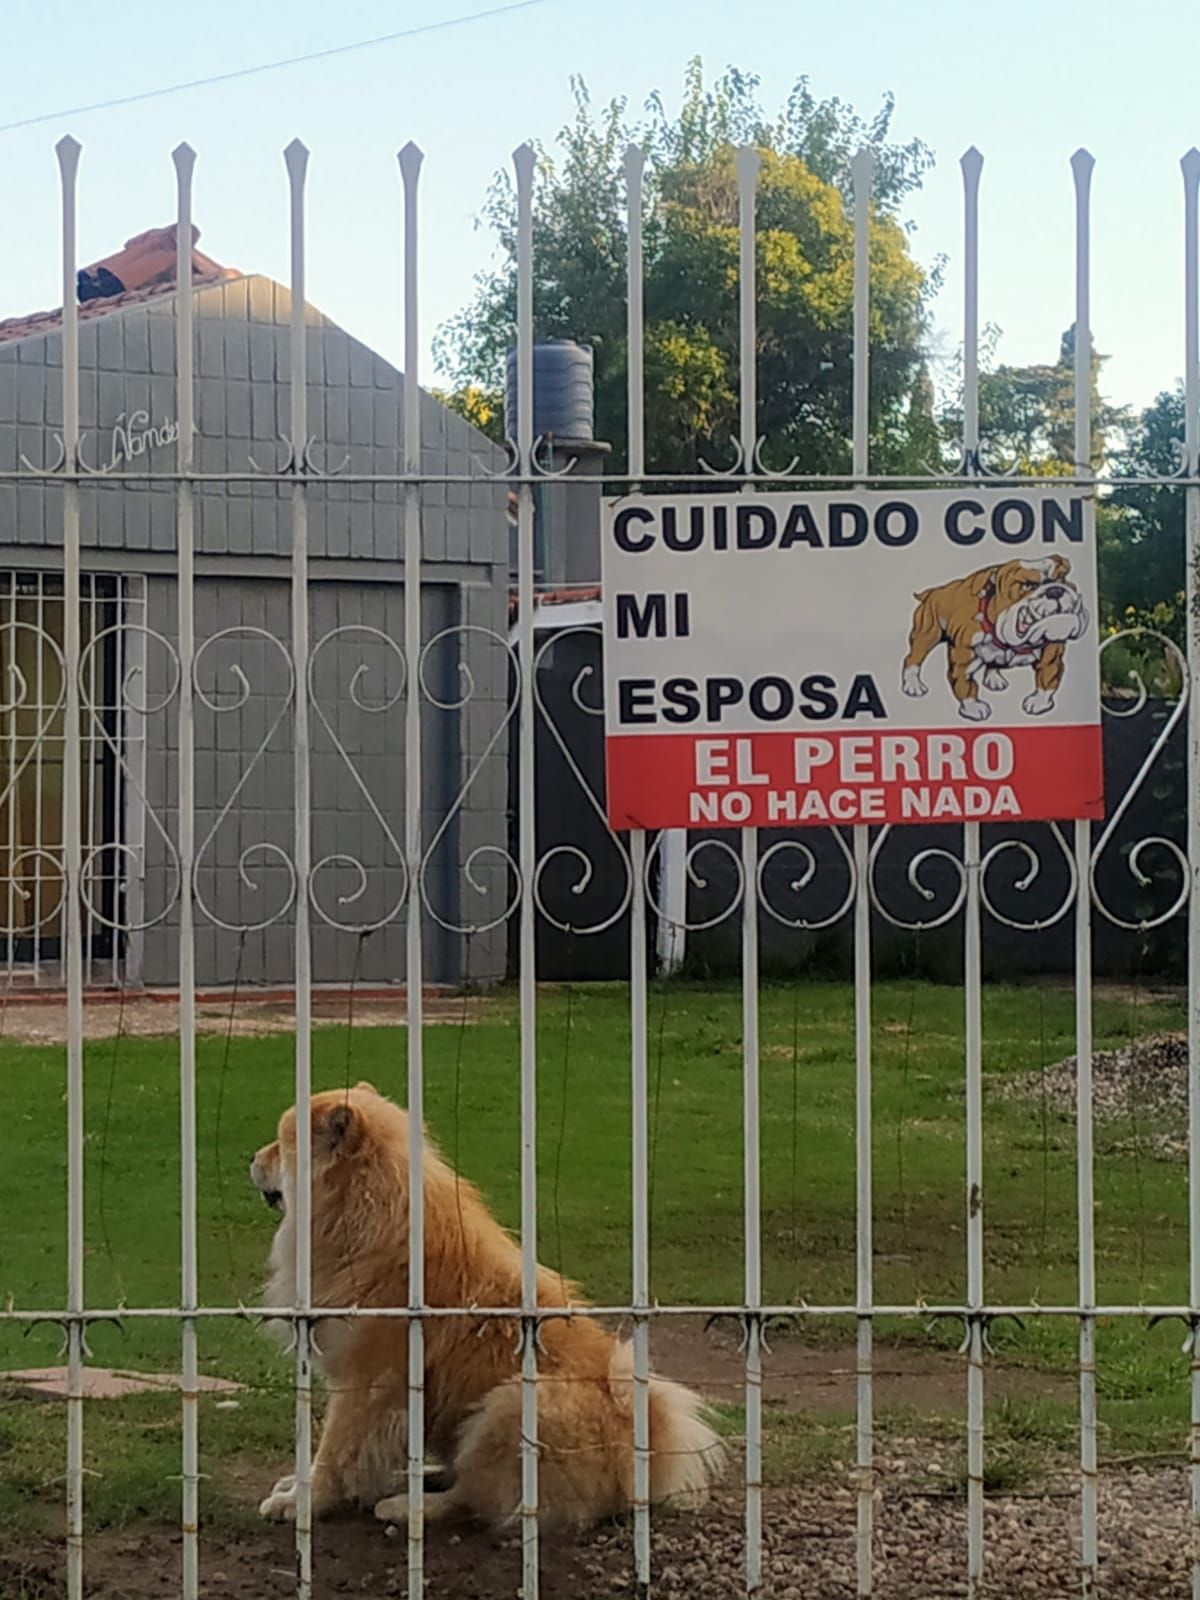 Seen in Argentina, the sign translates to: Beware of my wife. The dog doesn't bite.